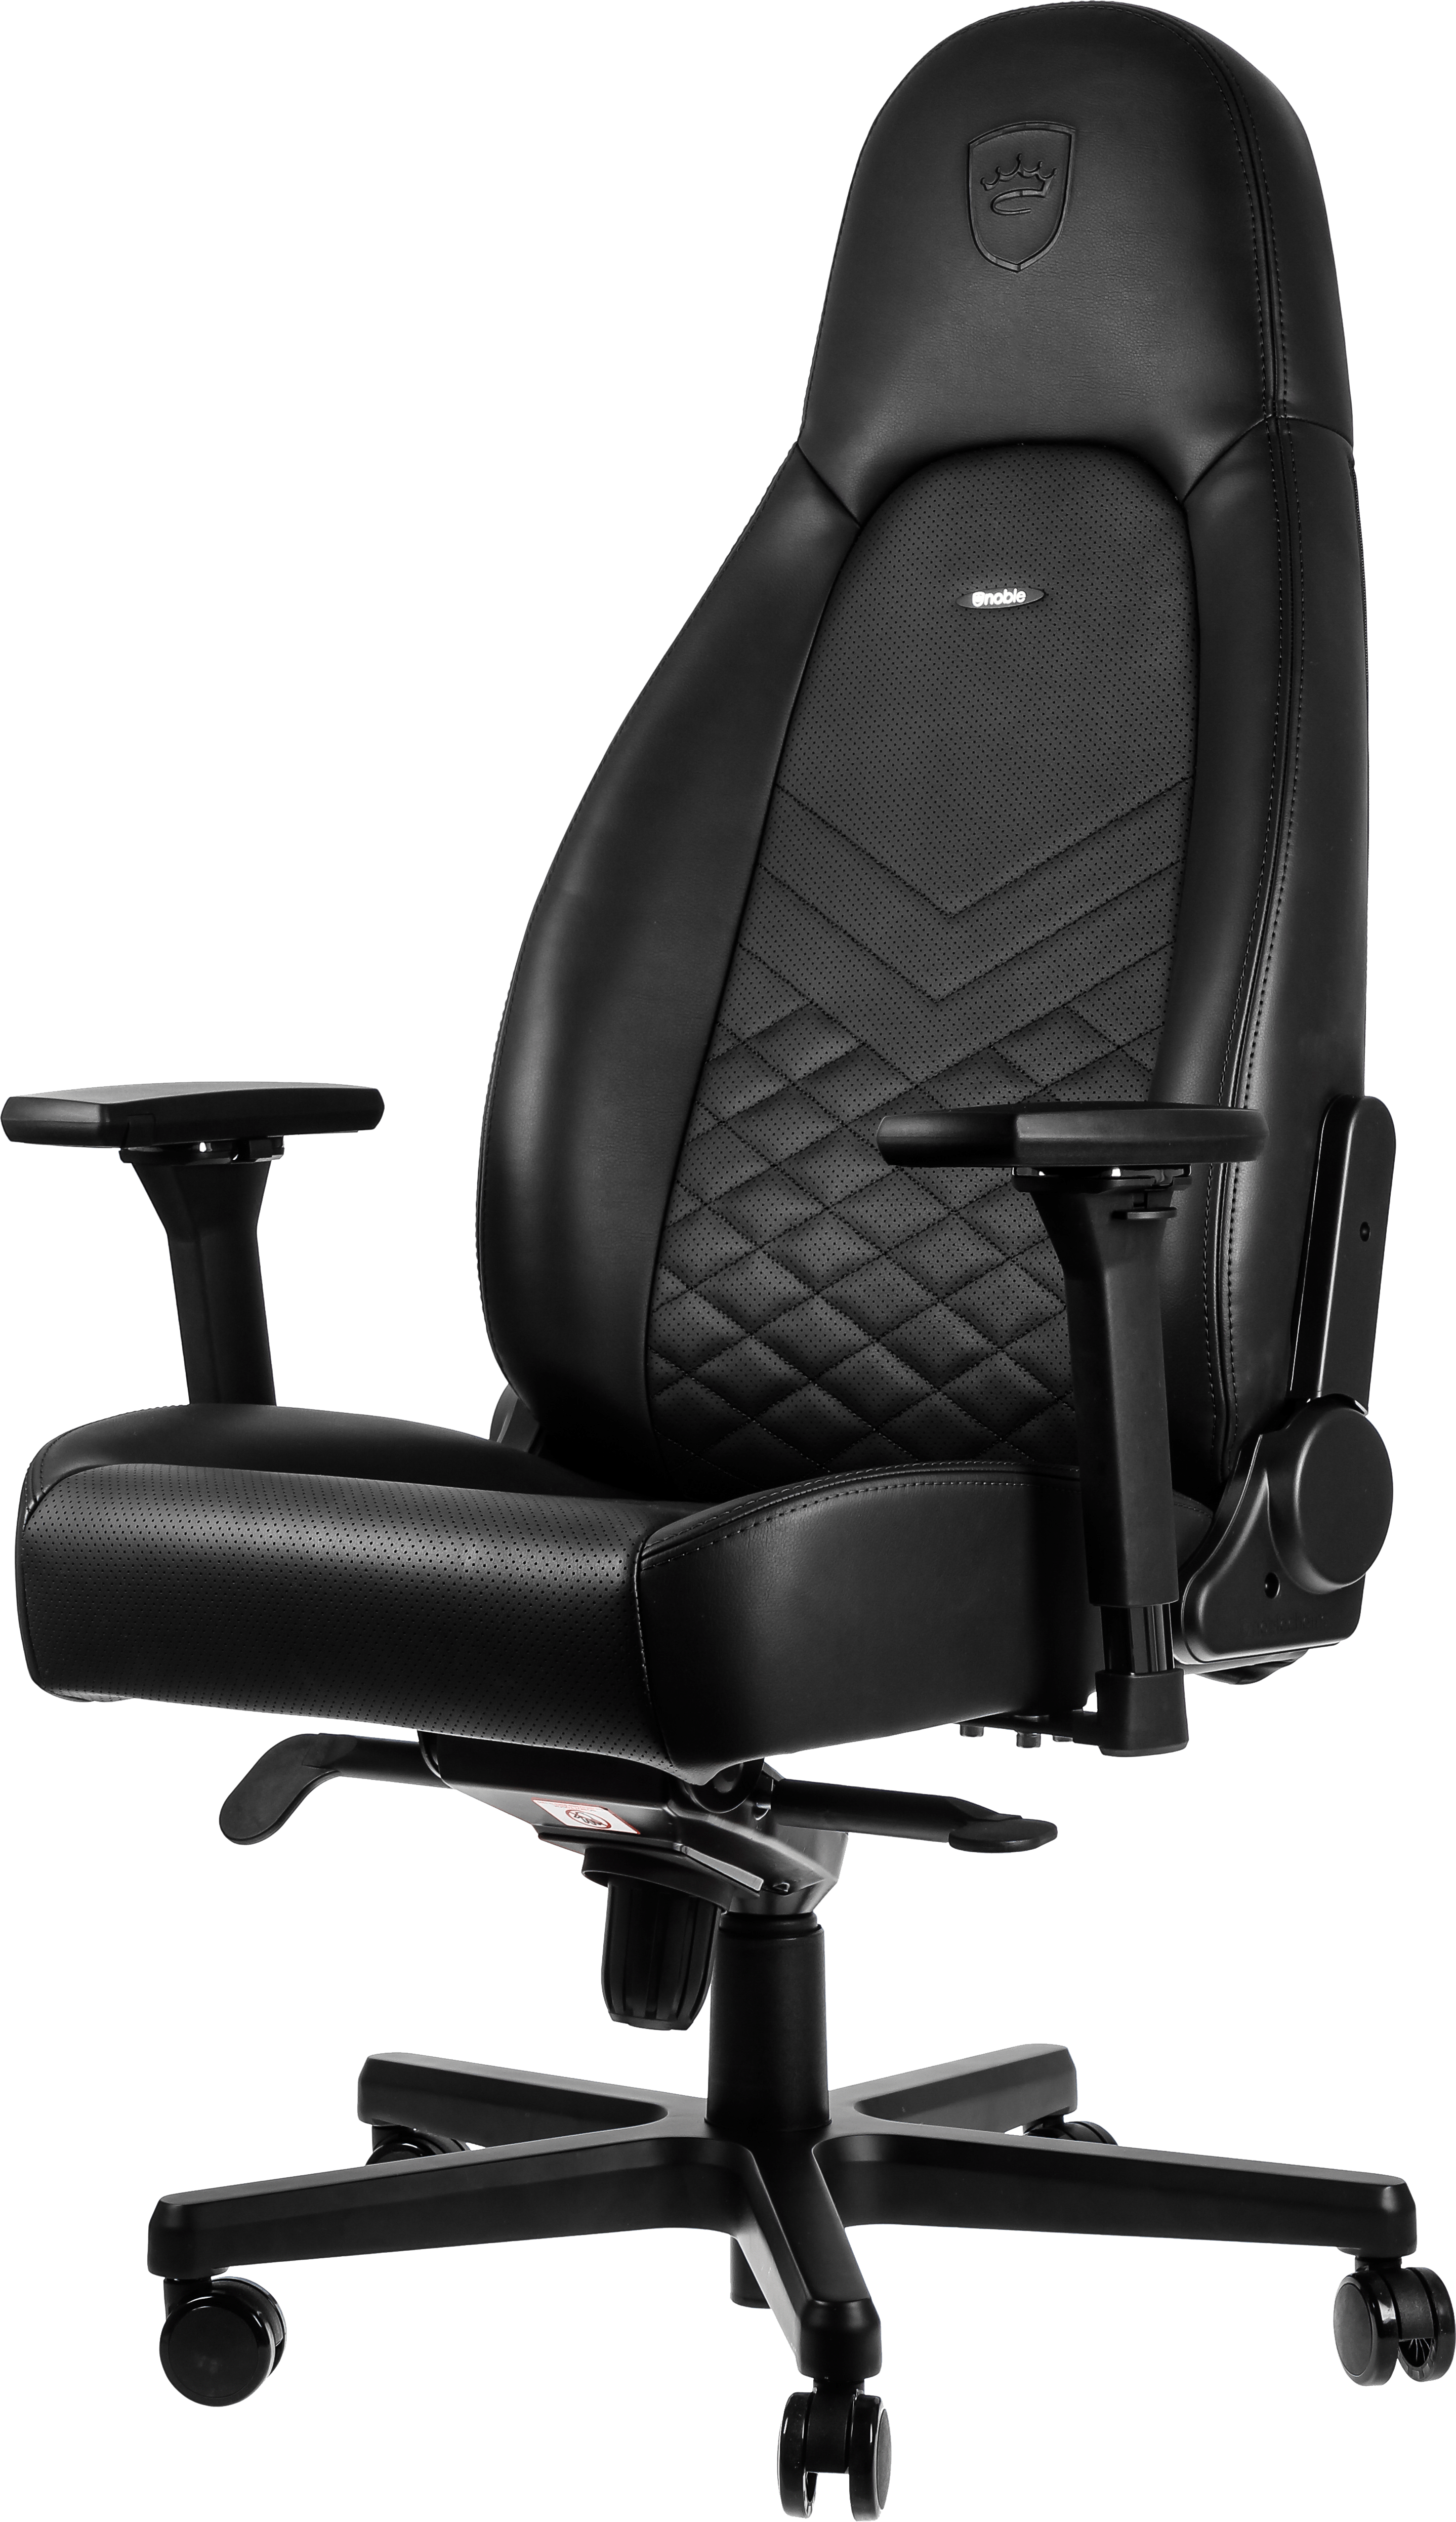 noblechairs - ICON - Become Iconic | noblechairs